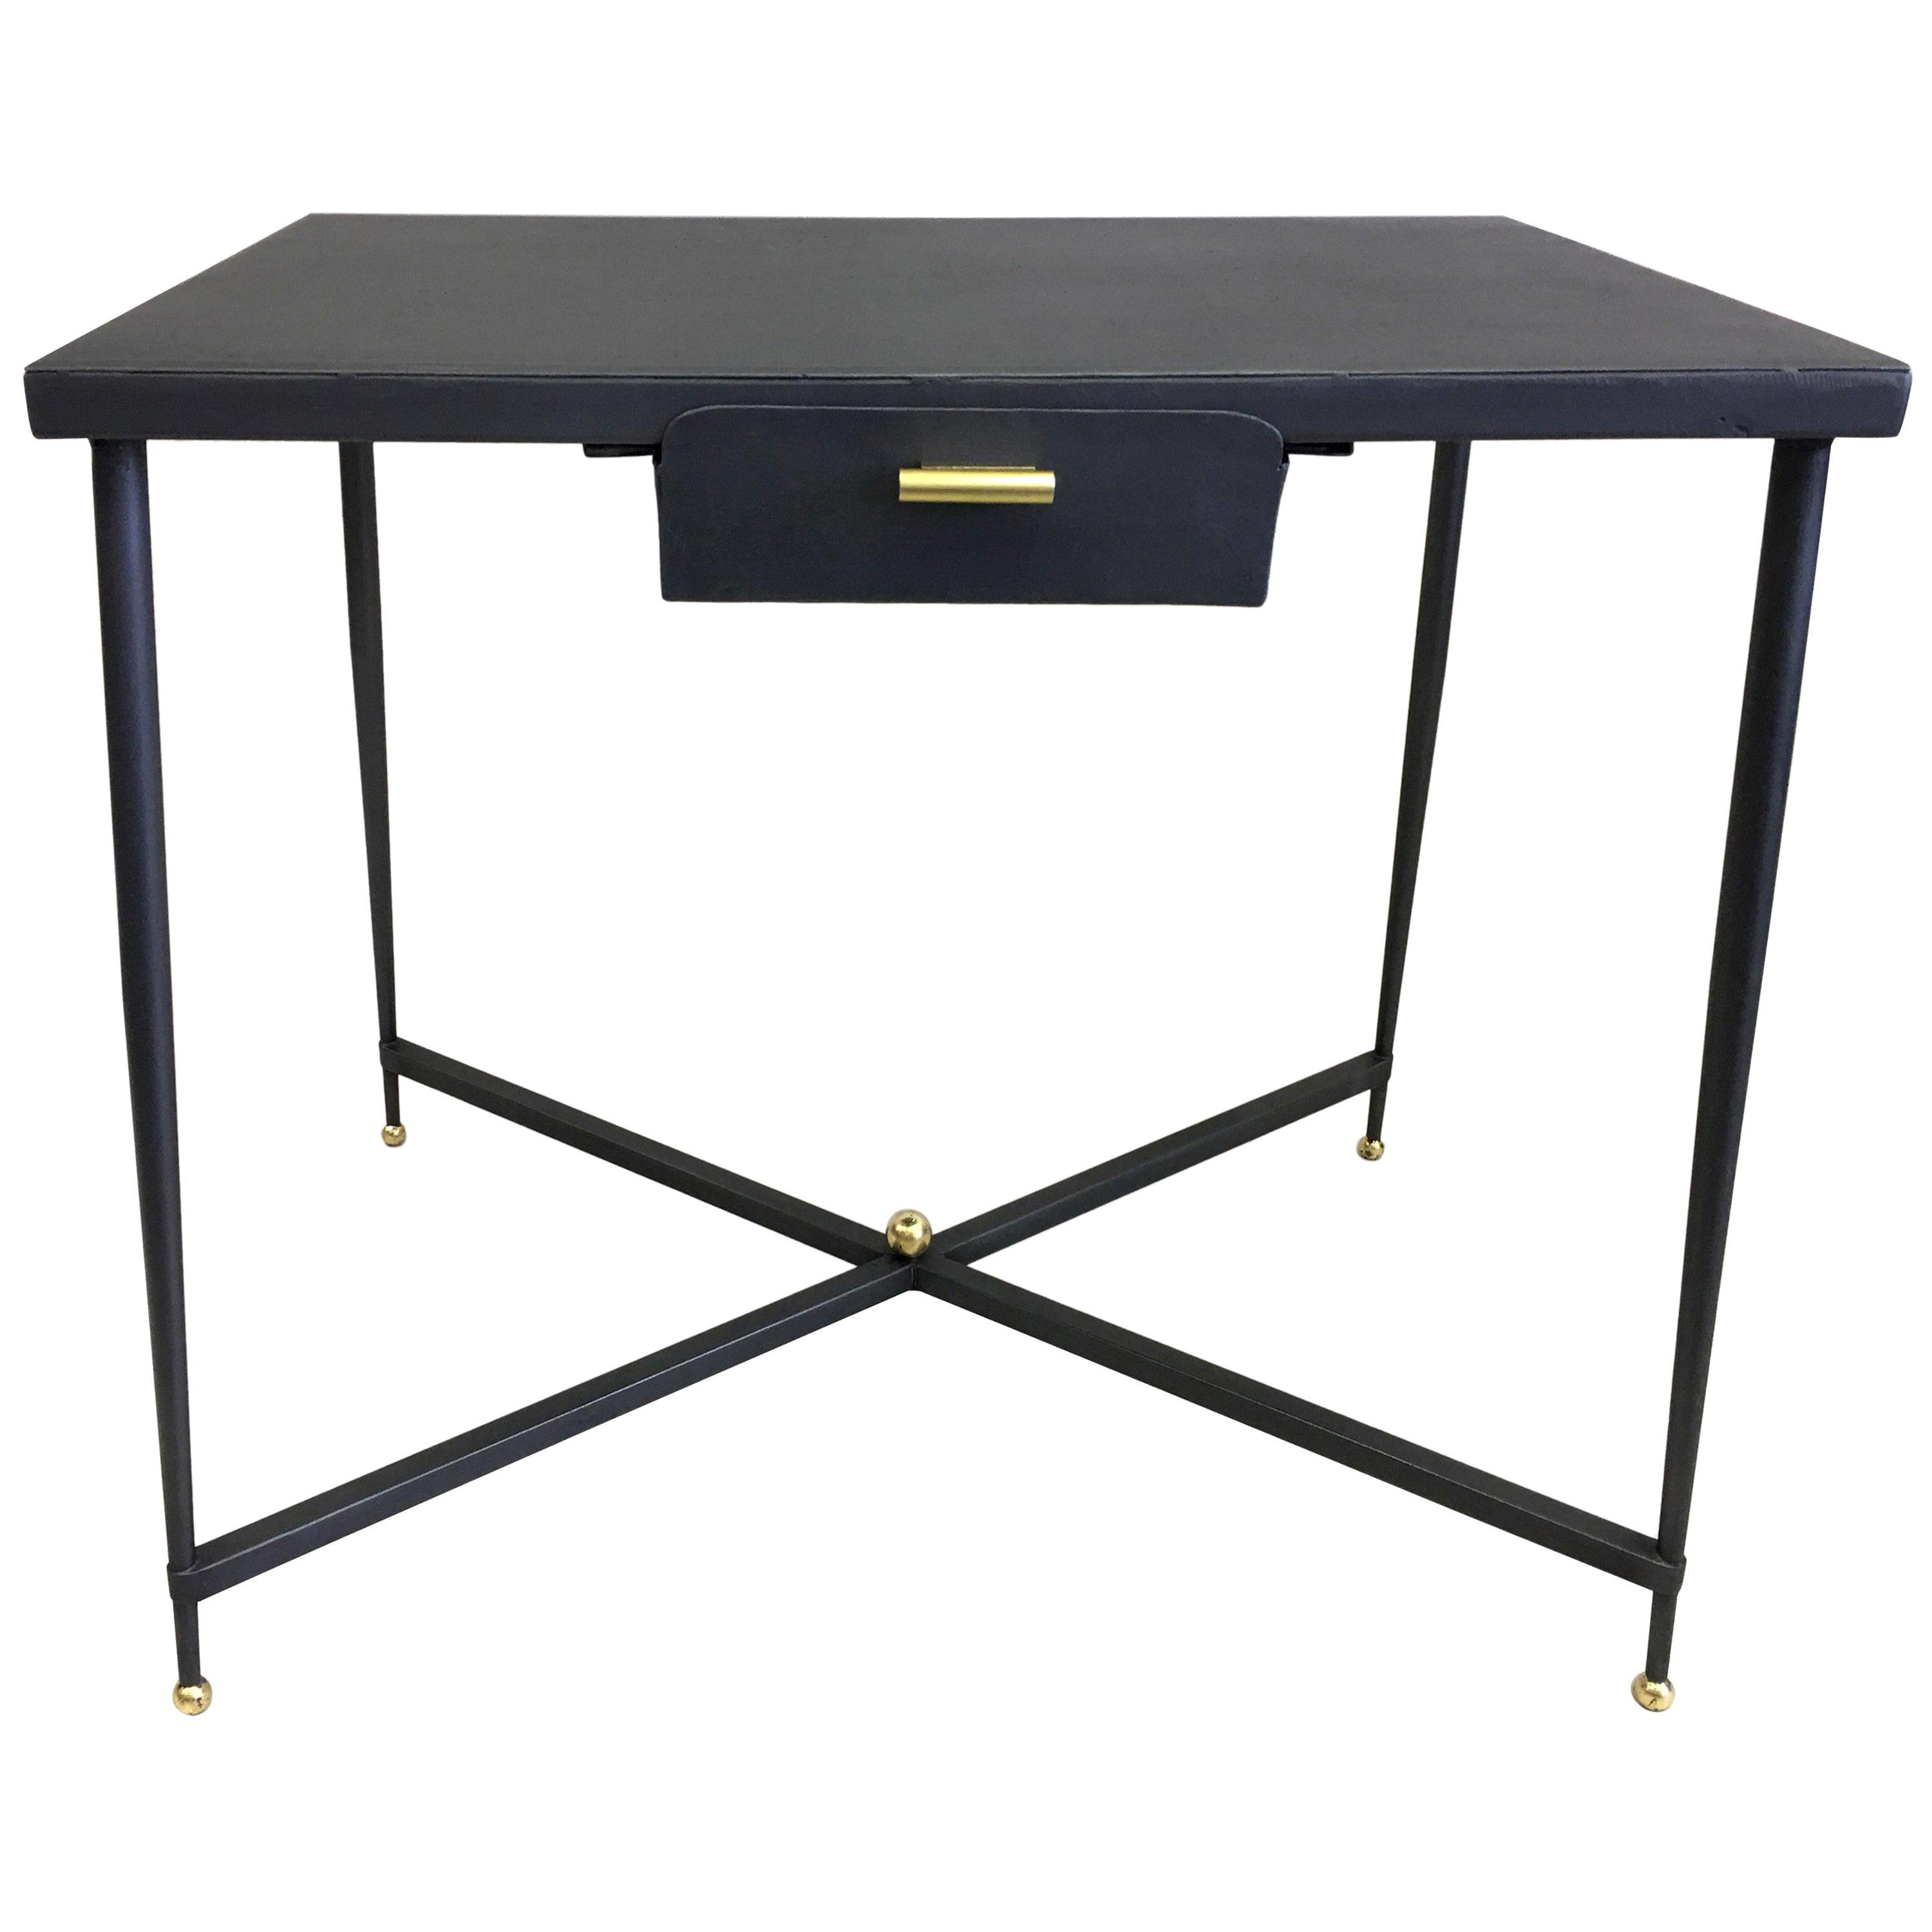 French Mid-Century Modern Neoclassical Desk /Writing Table by Jacques Adnet 1940 For Sale